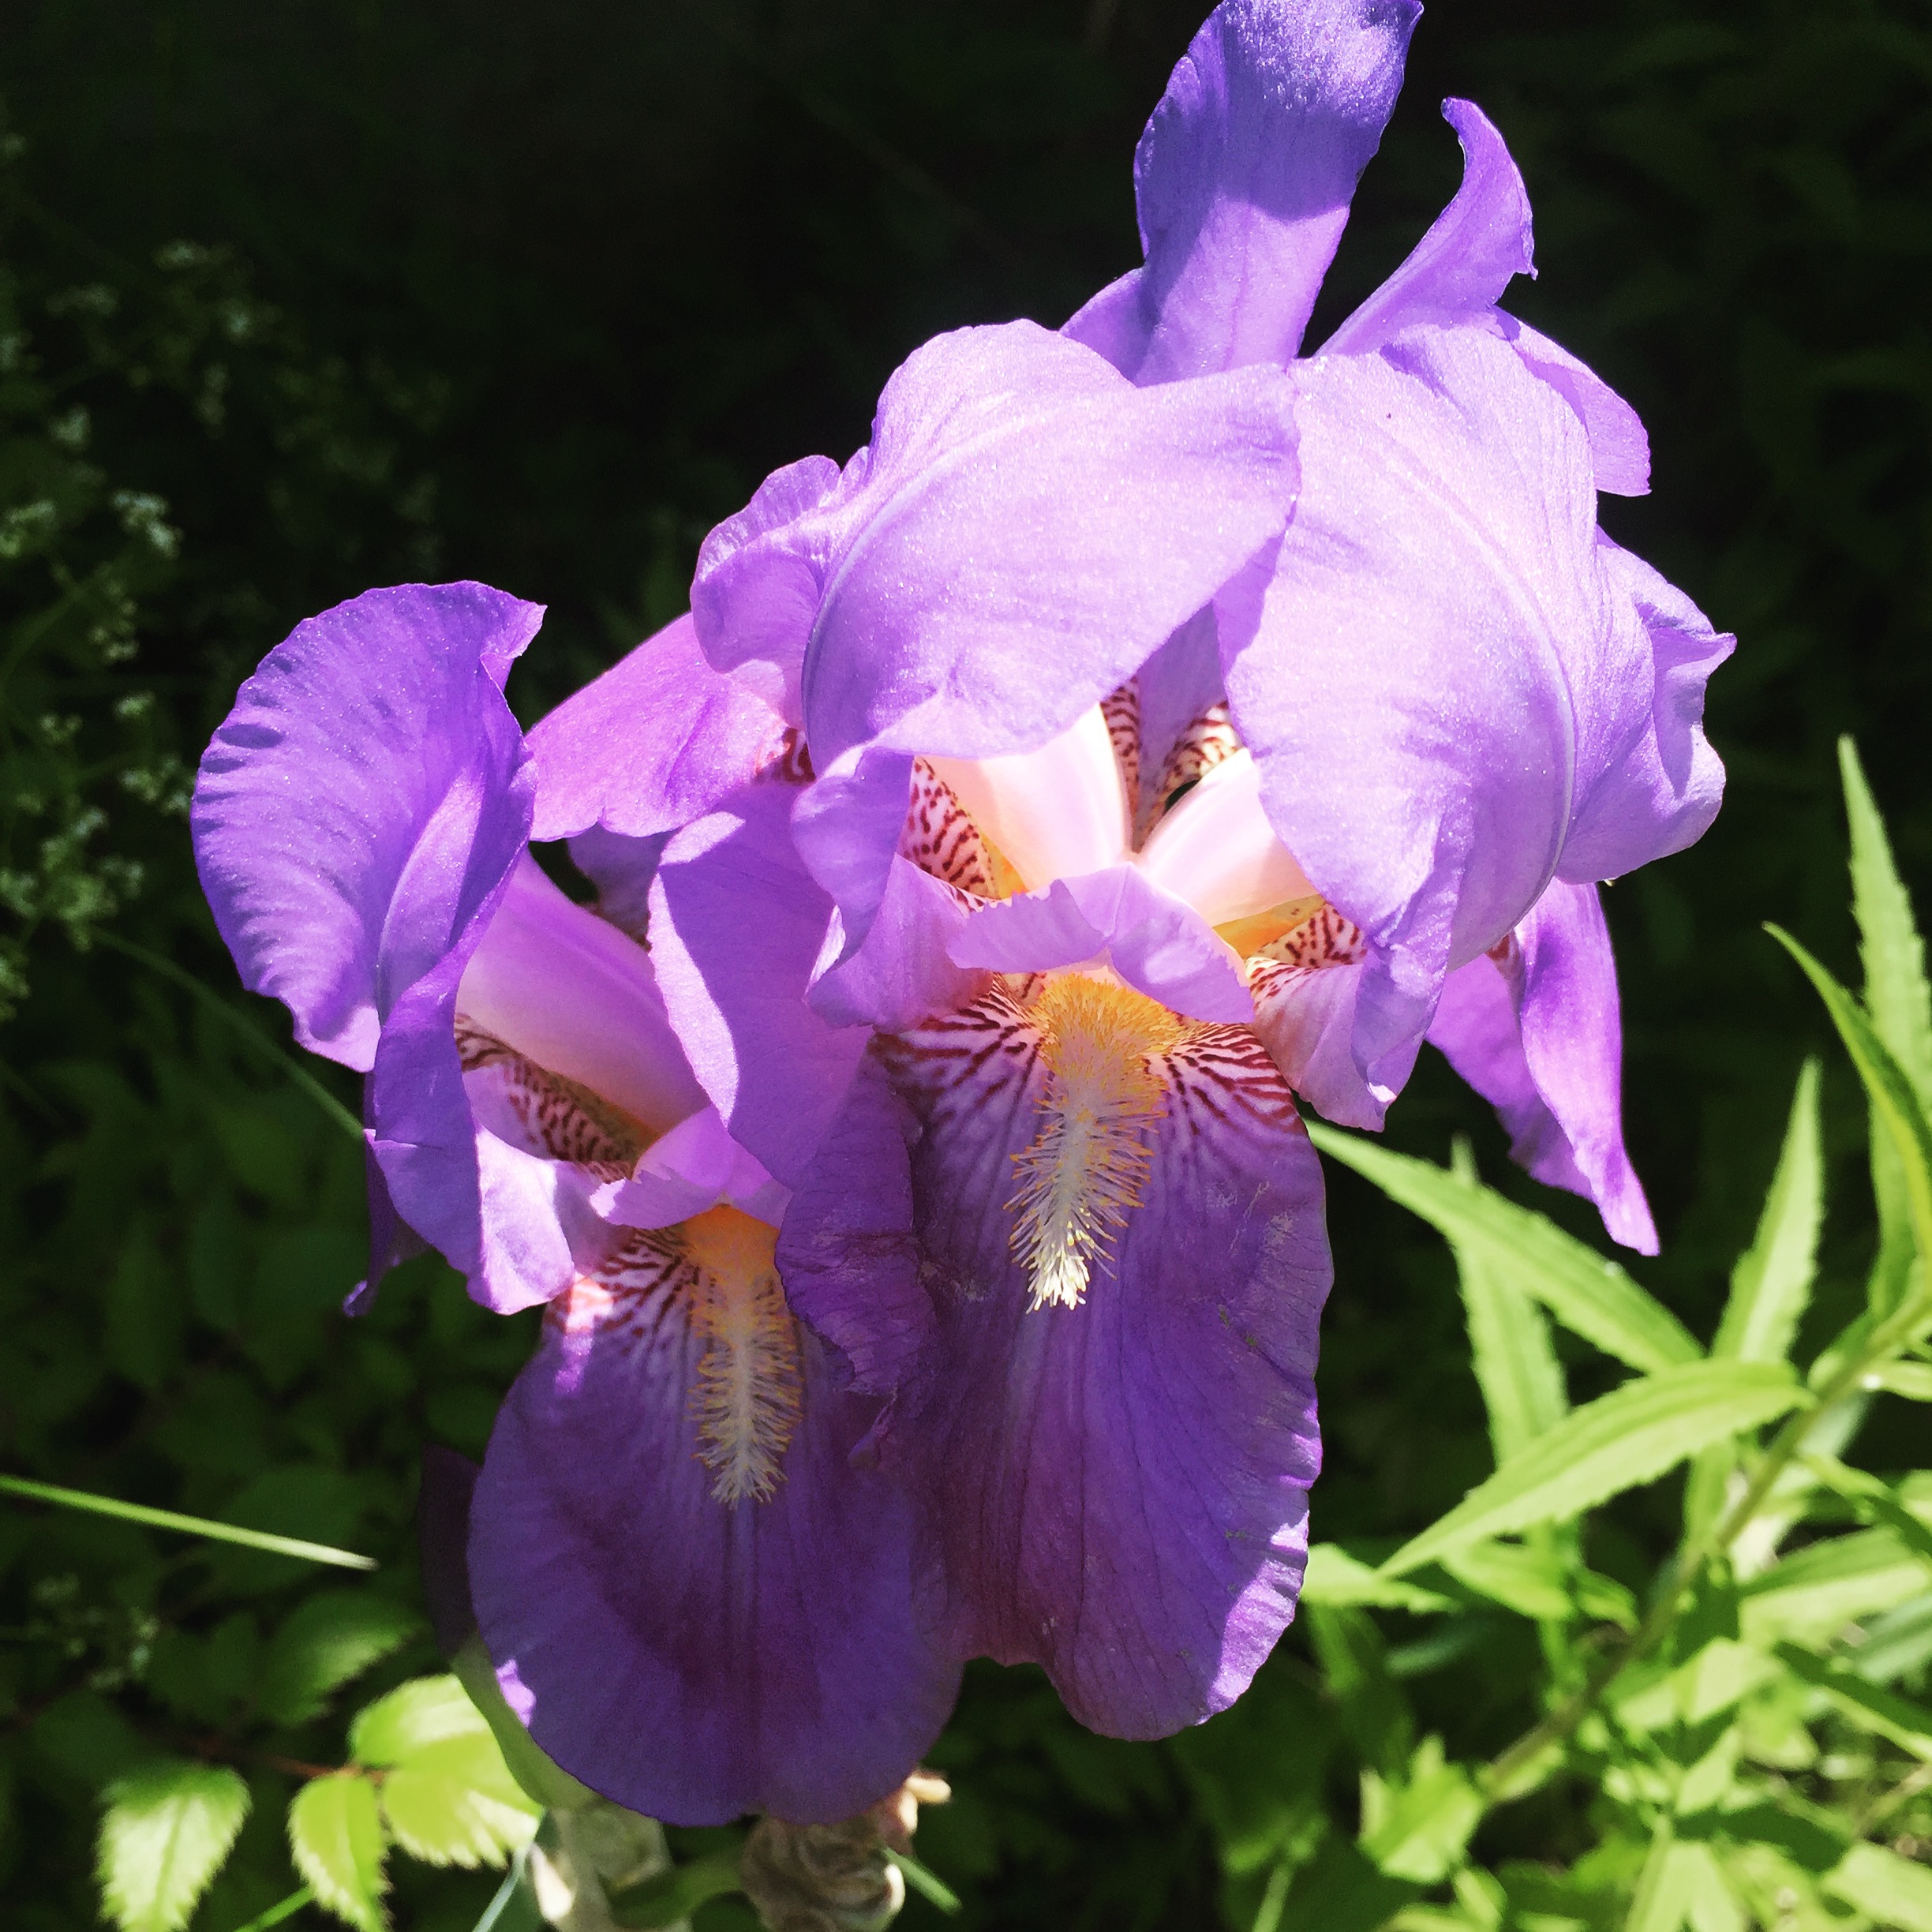  The bearded irises are luminous in the afternoon sunshine today.  